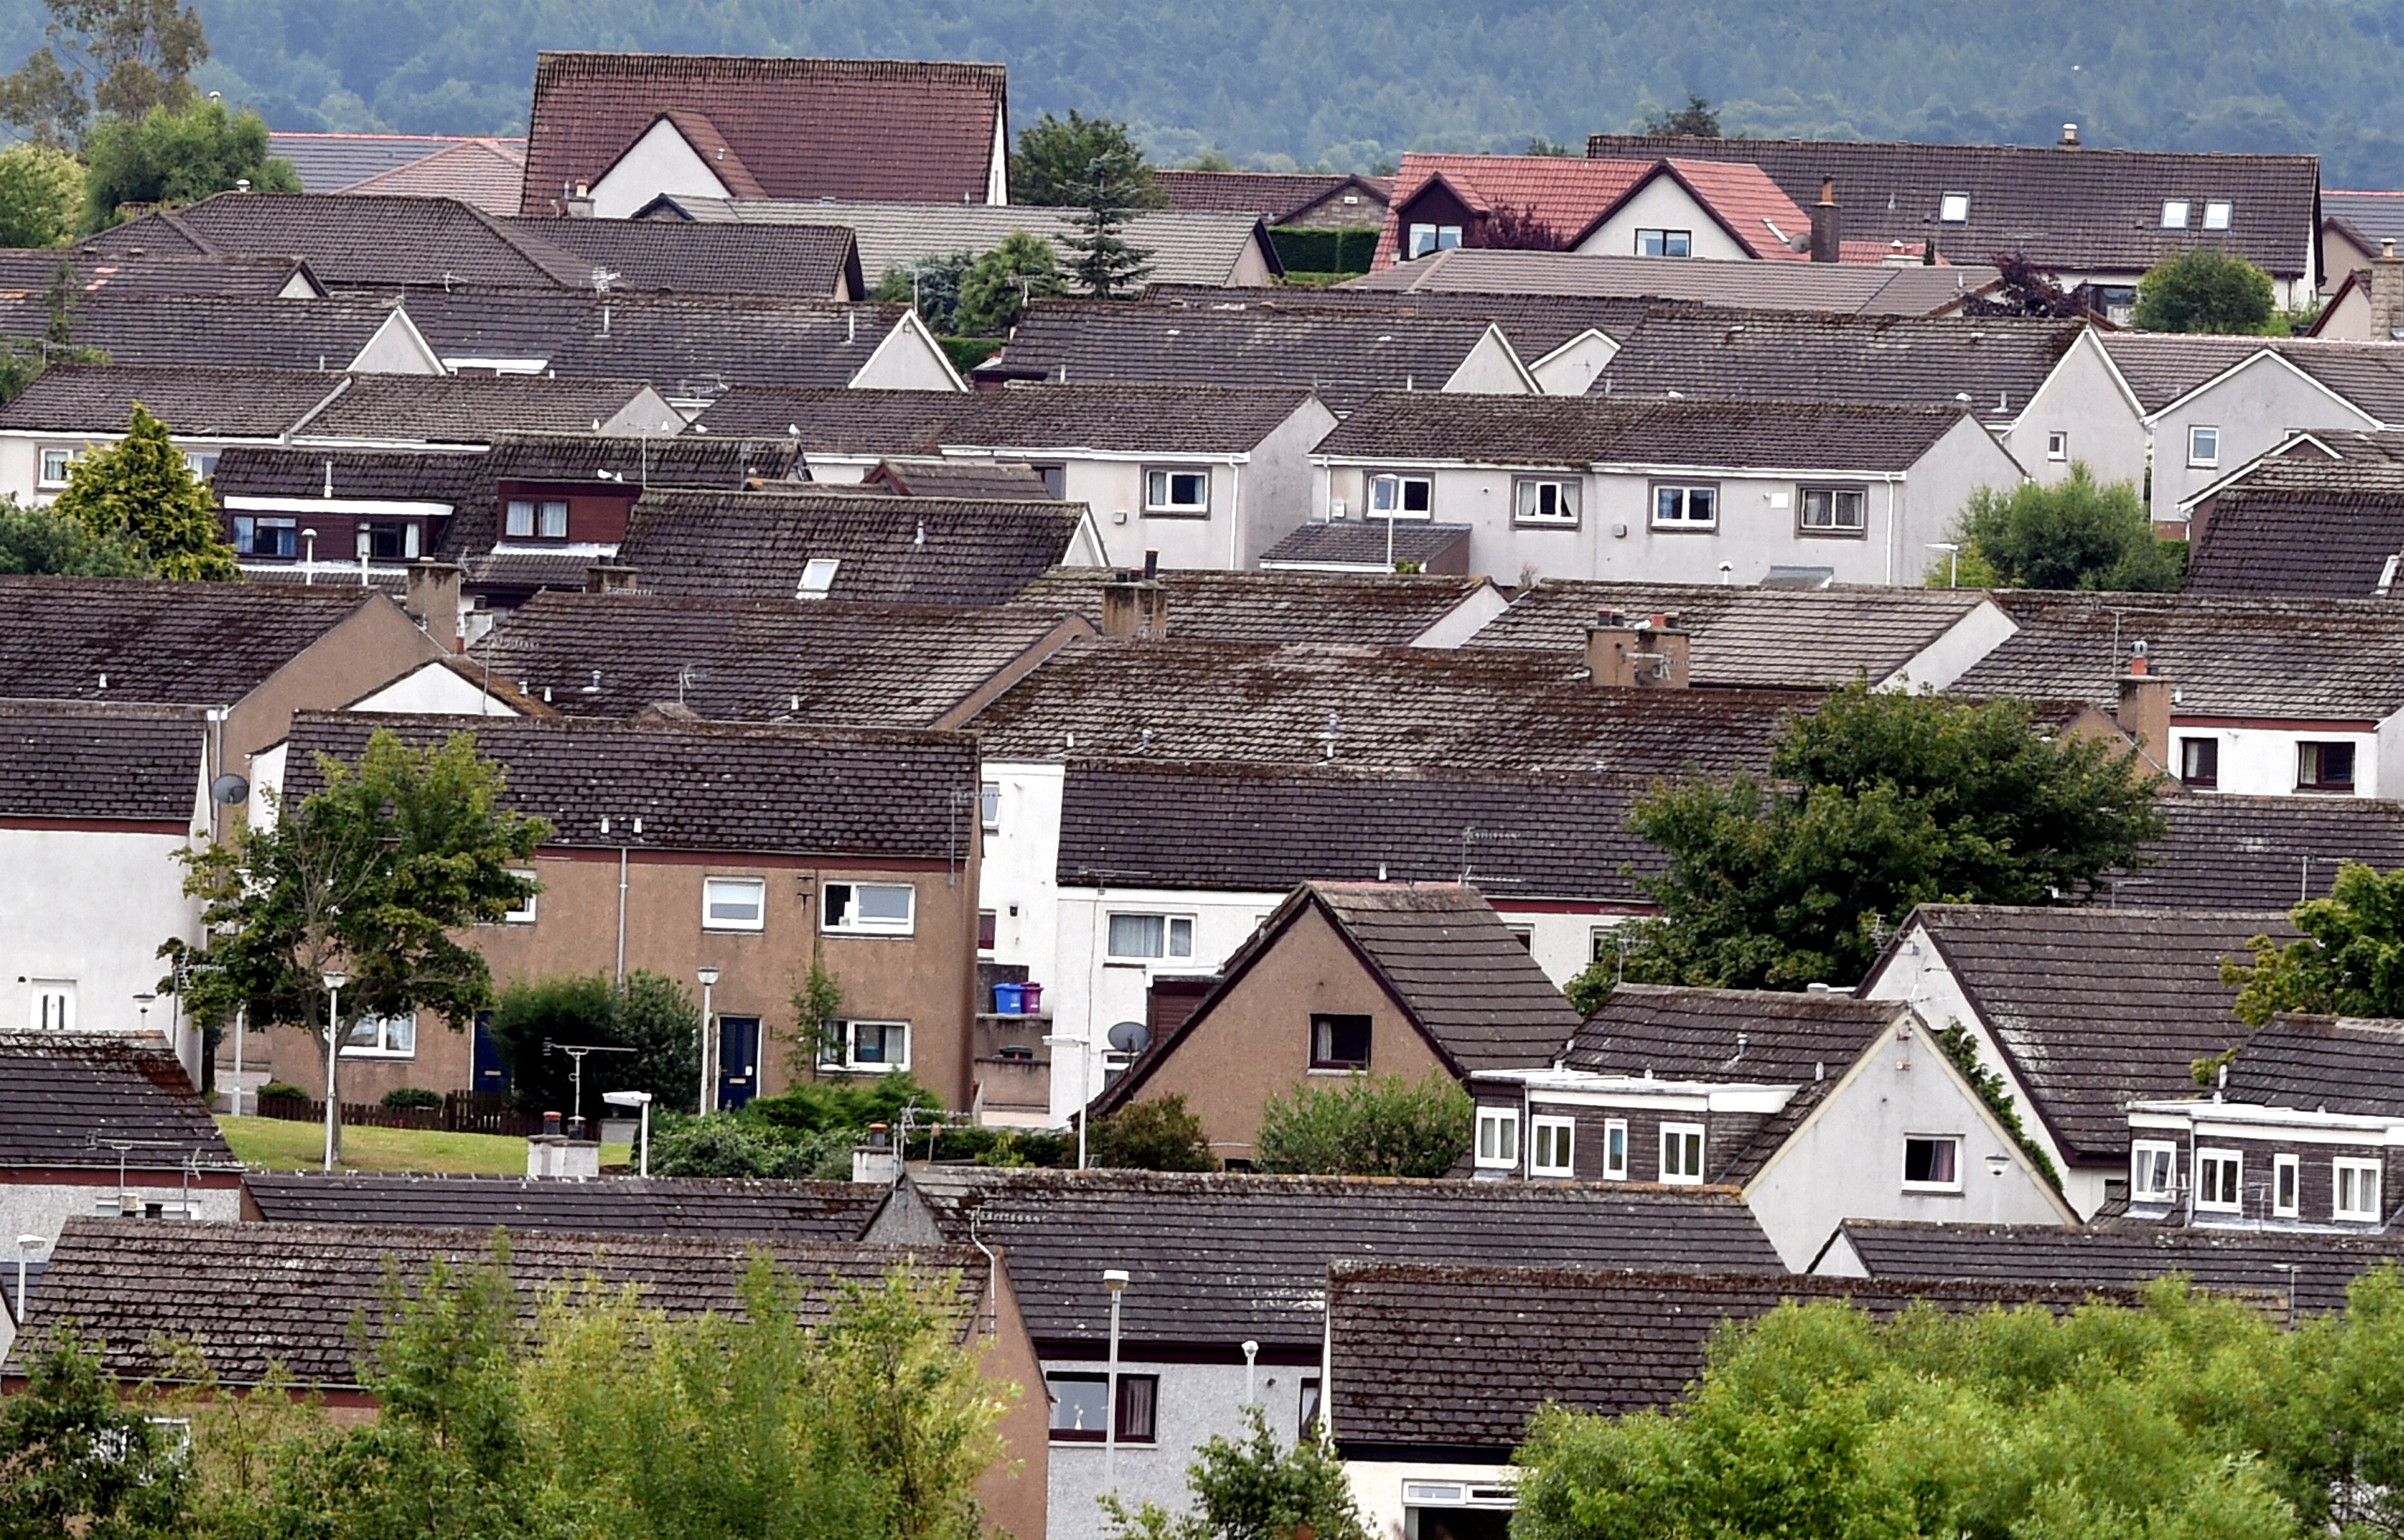 More than 3,500 are on the housing waiting list in Moray.